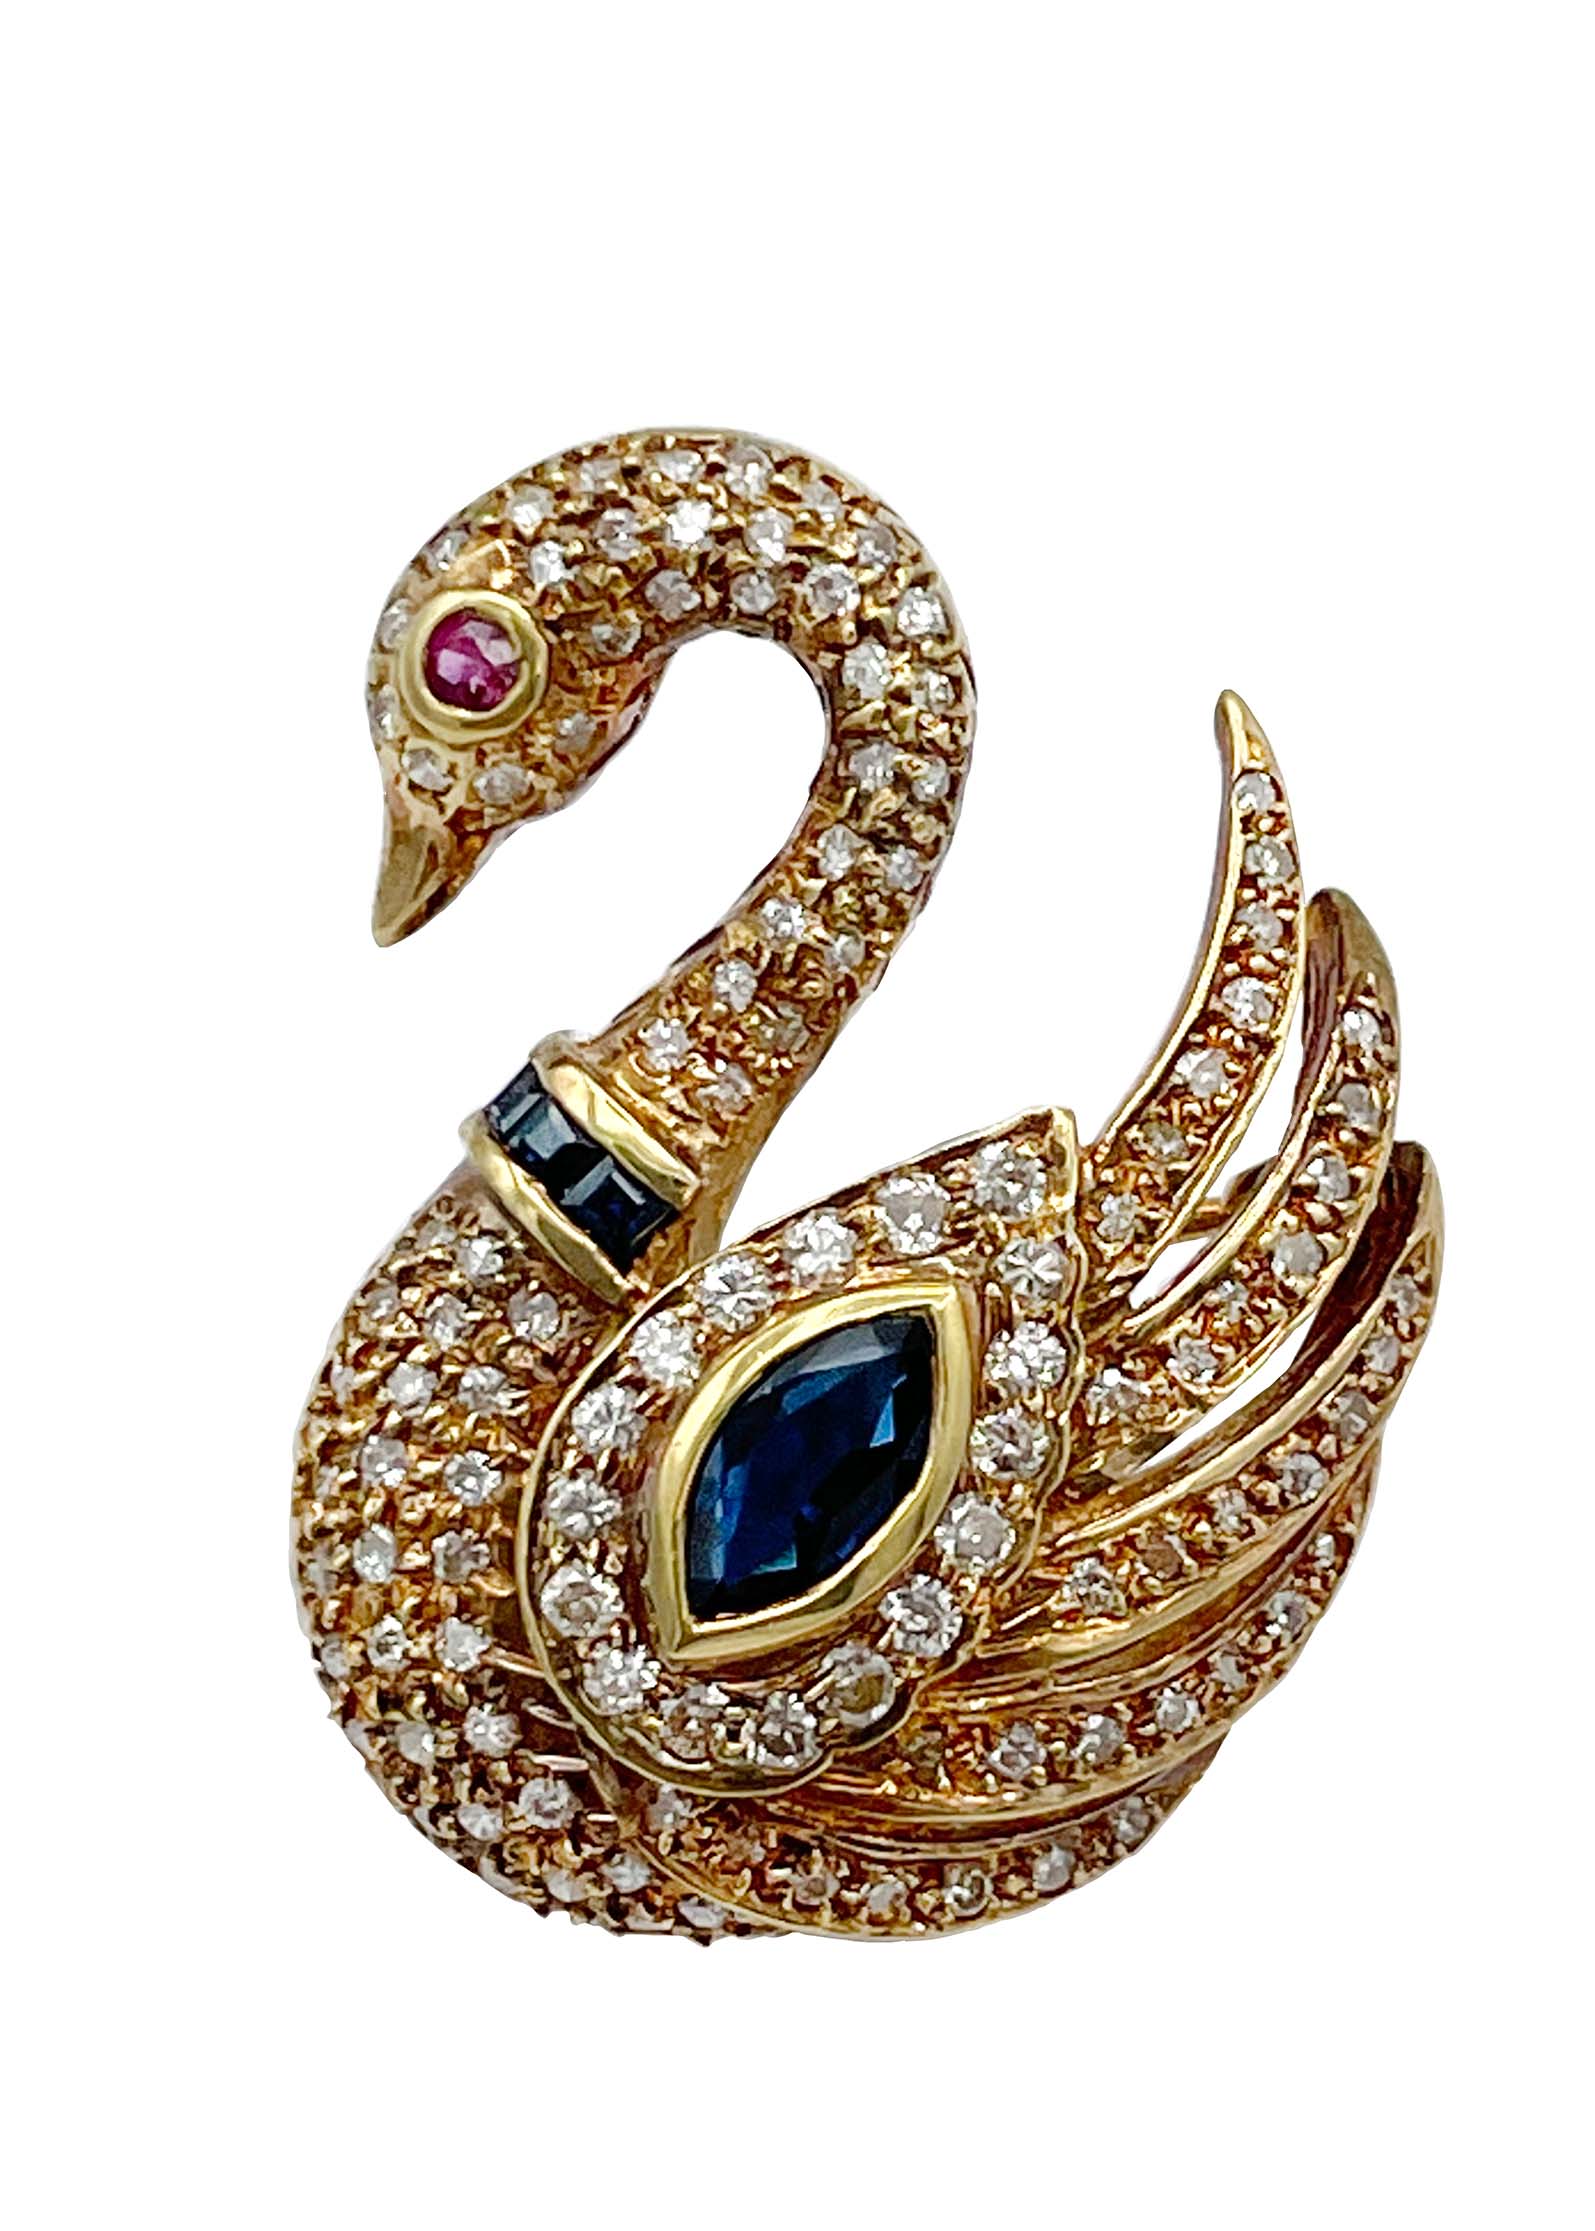 18k Solid Yellow Gold Swan Pin with Diamonds, Ruby and Sapphire Image